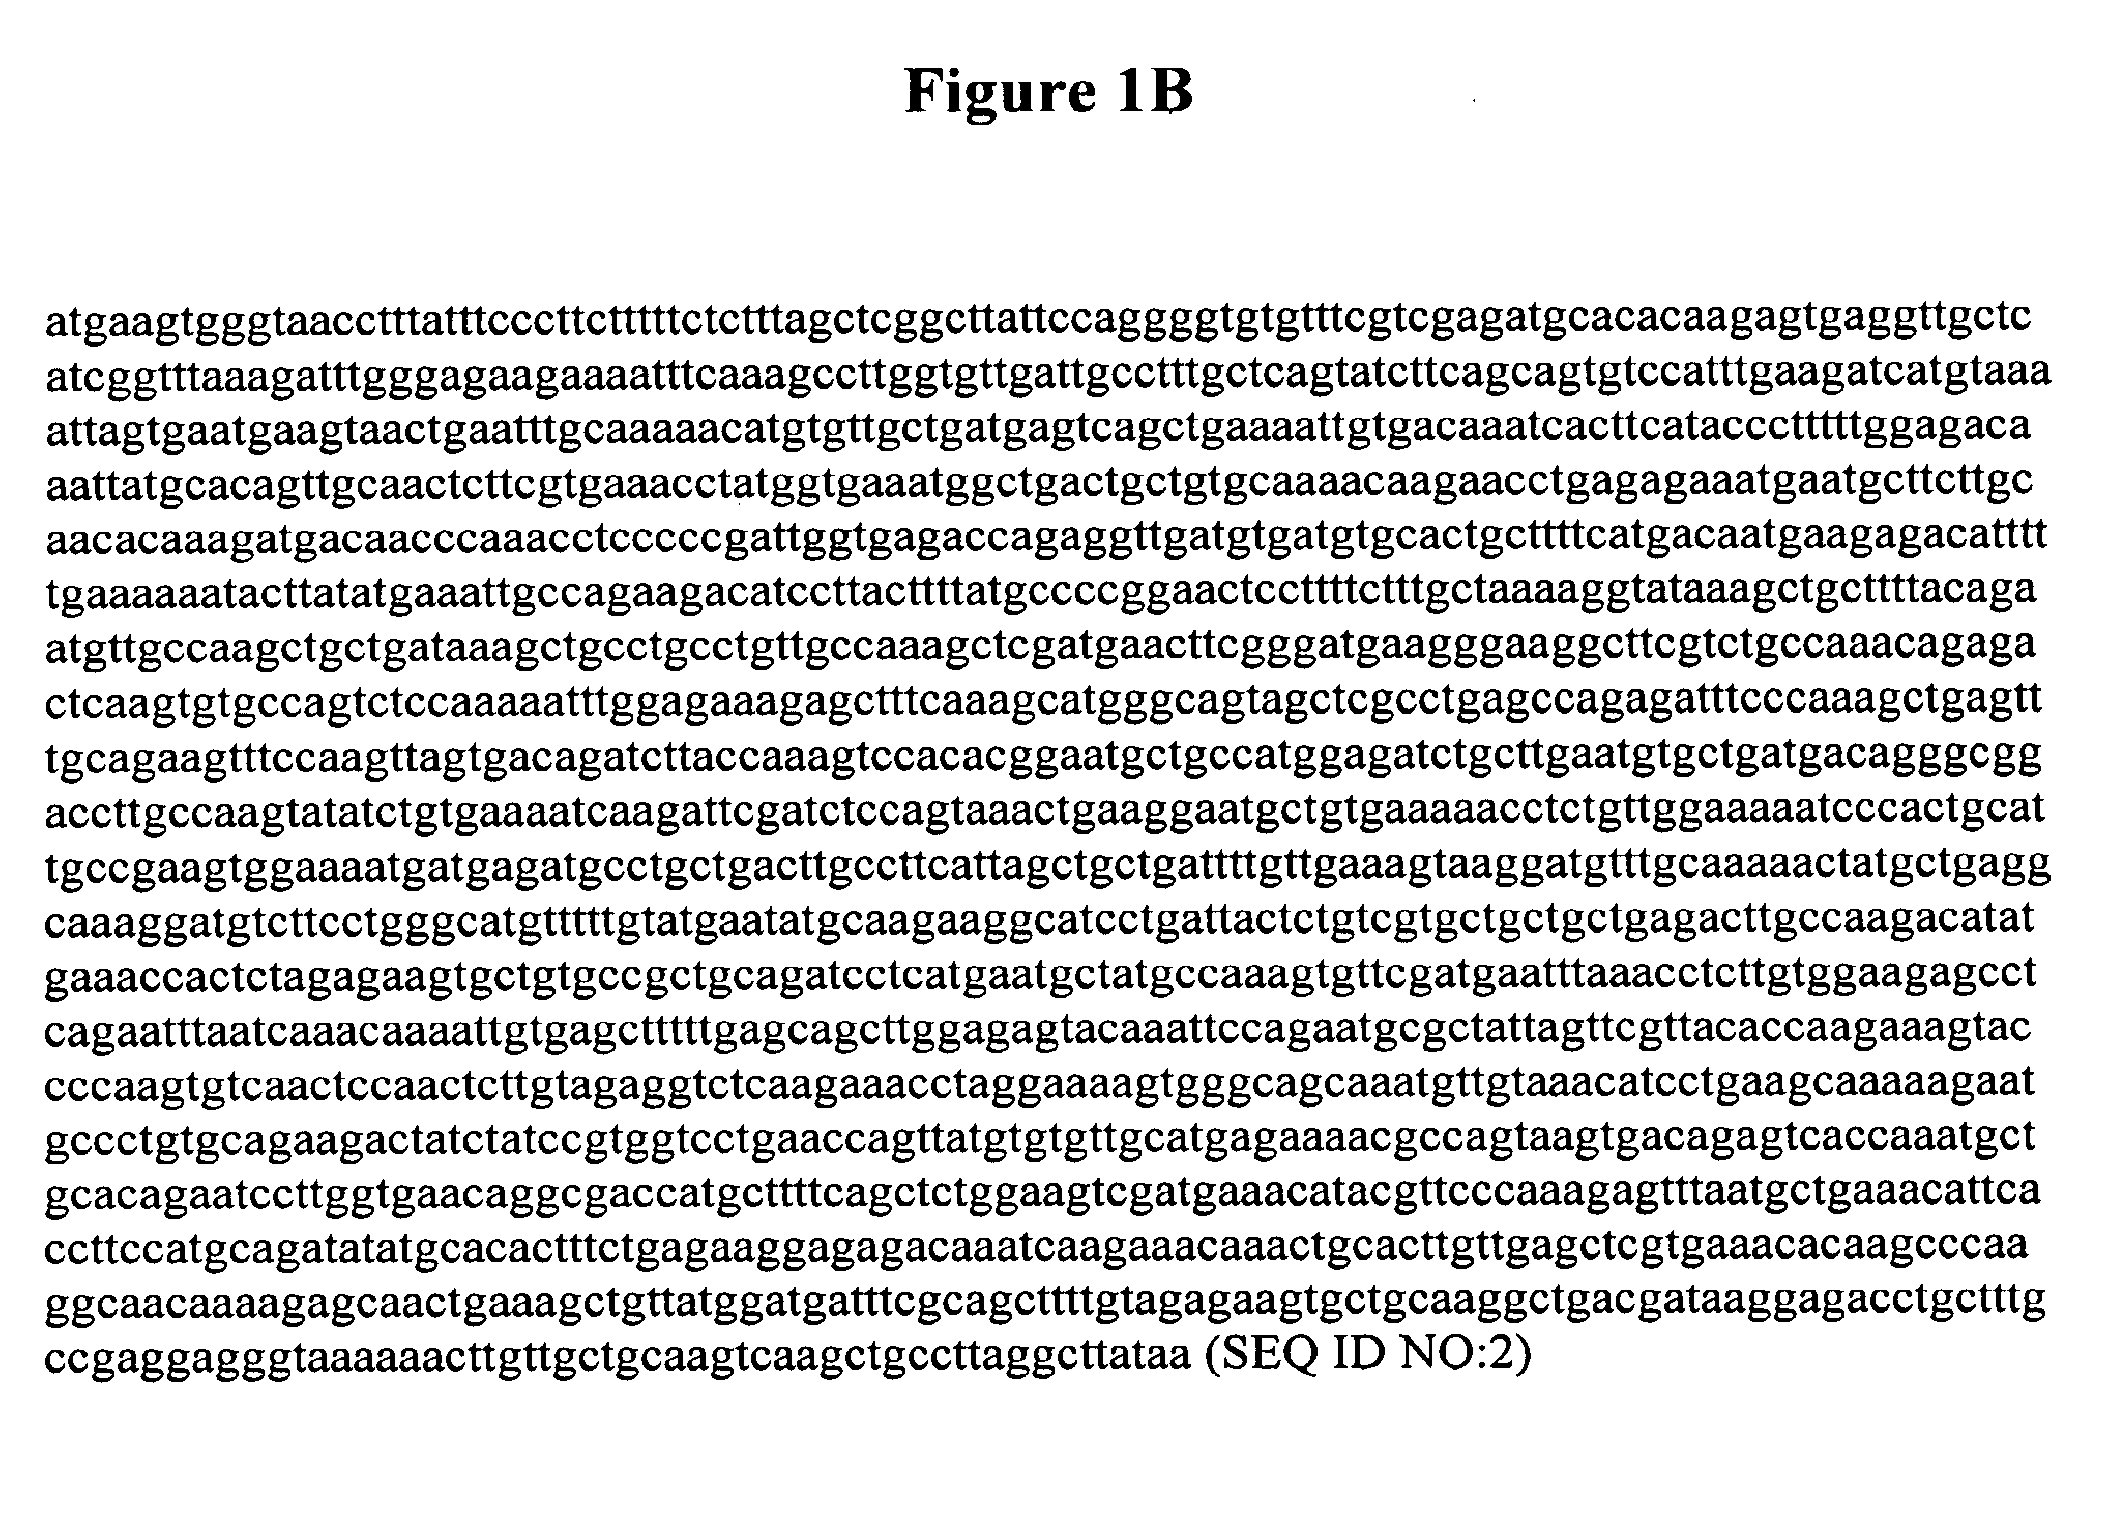 Modified Human Plasma Polypeptide or Fc Scaffolds and Their Uses